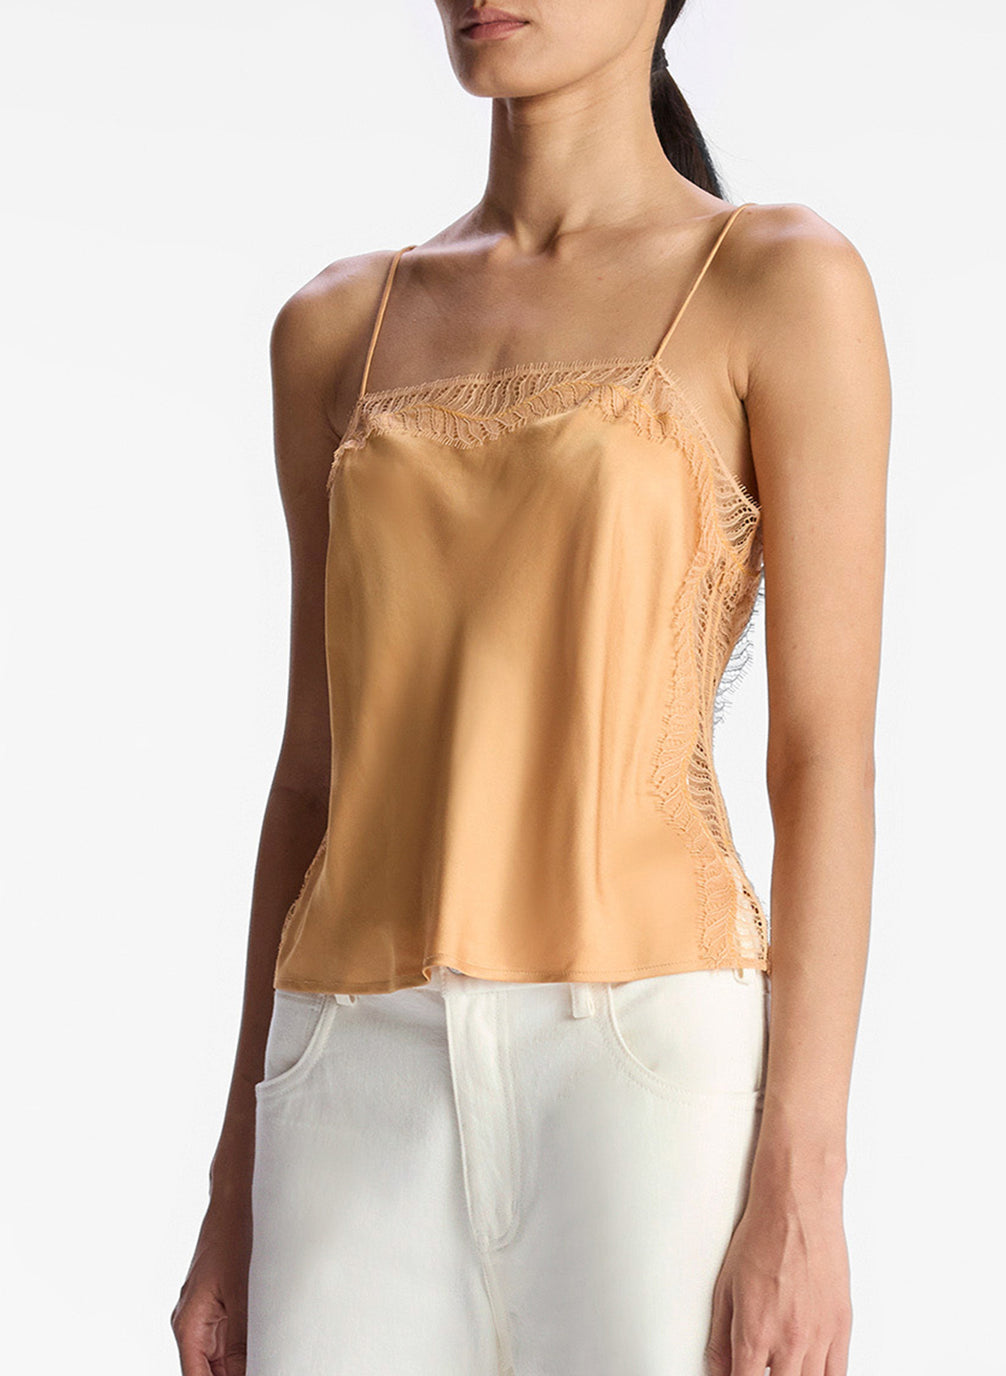 detail view of woman wearing tan lace trim camisole and white pants